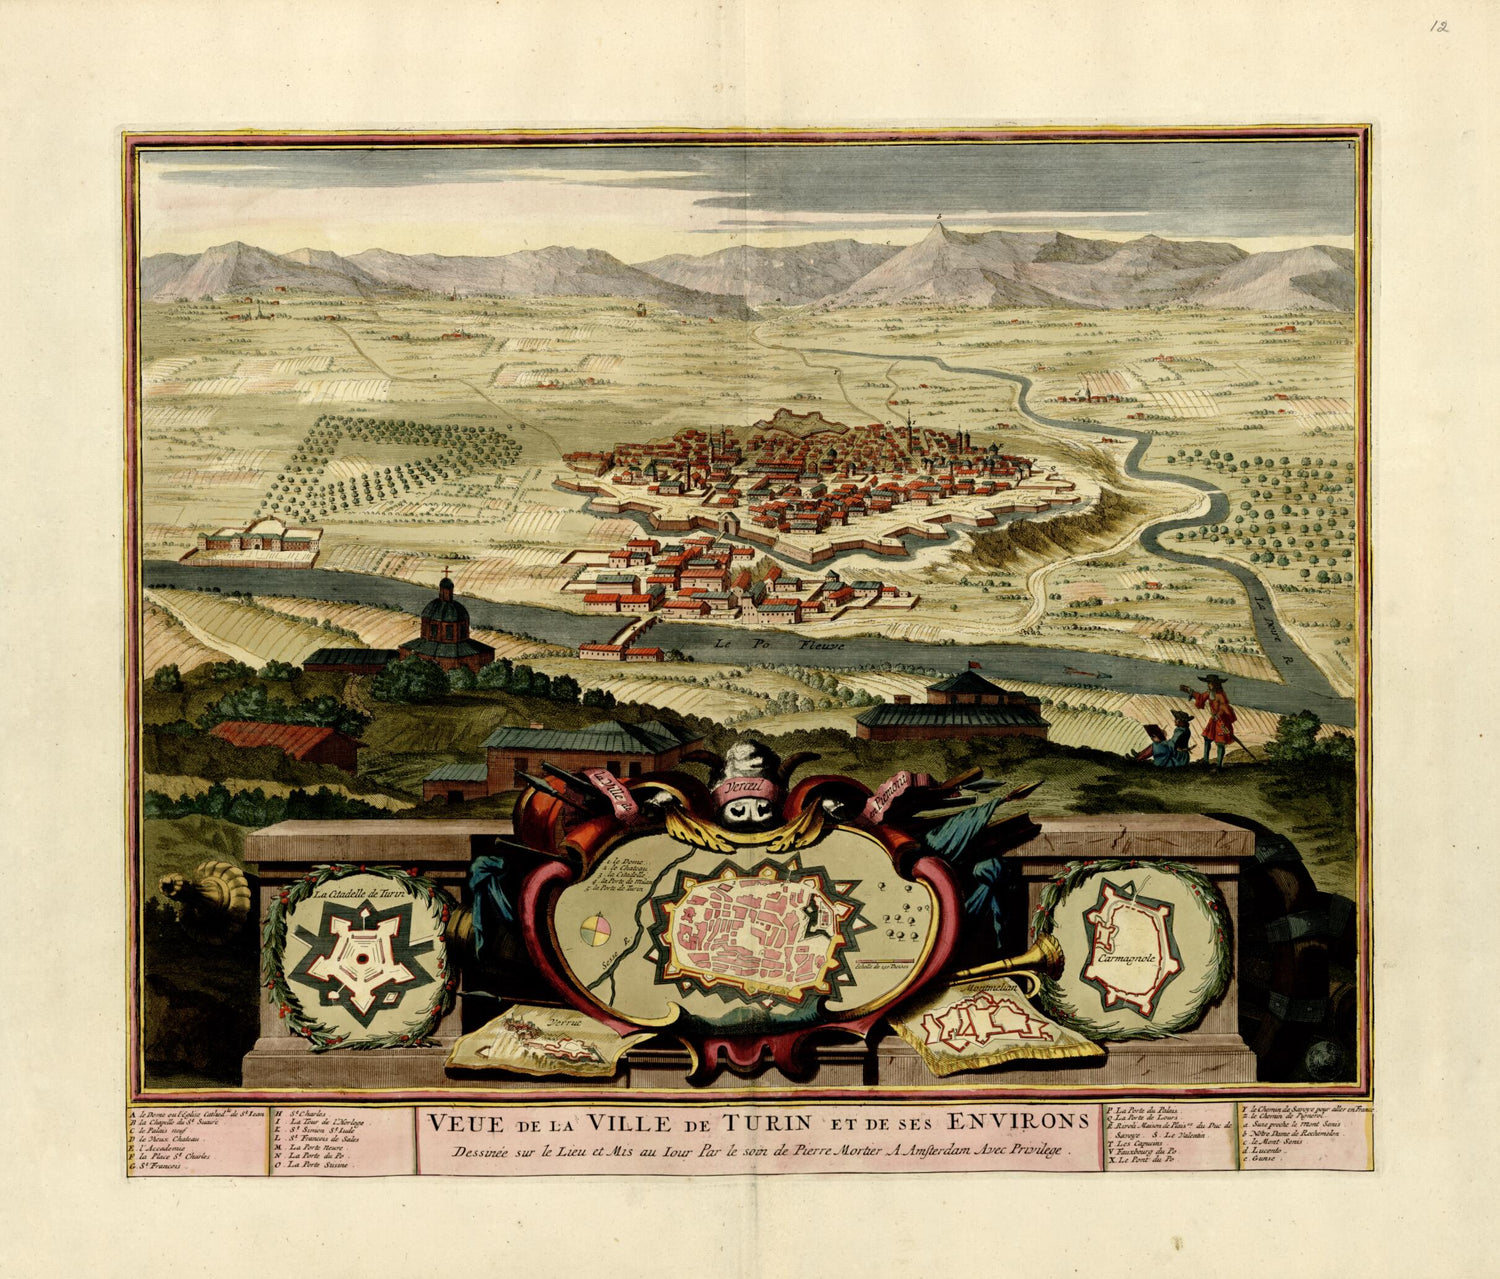 This old map of Veue De La Ville De Turin Et Ses Environs from a Collection of Plans of Fortifications and Battles, 1684-from 1709 from 1709 was created by Anna Beeck in 1709